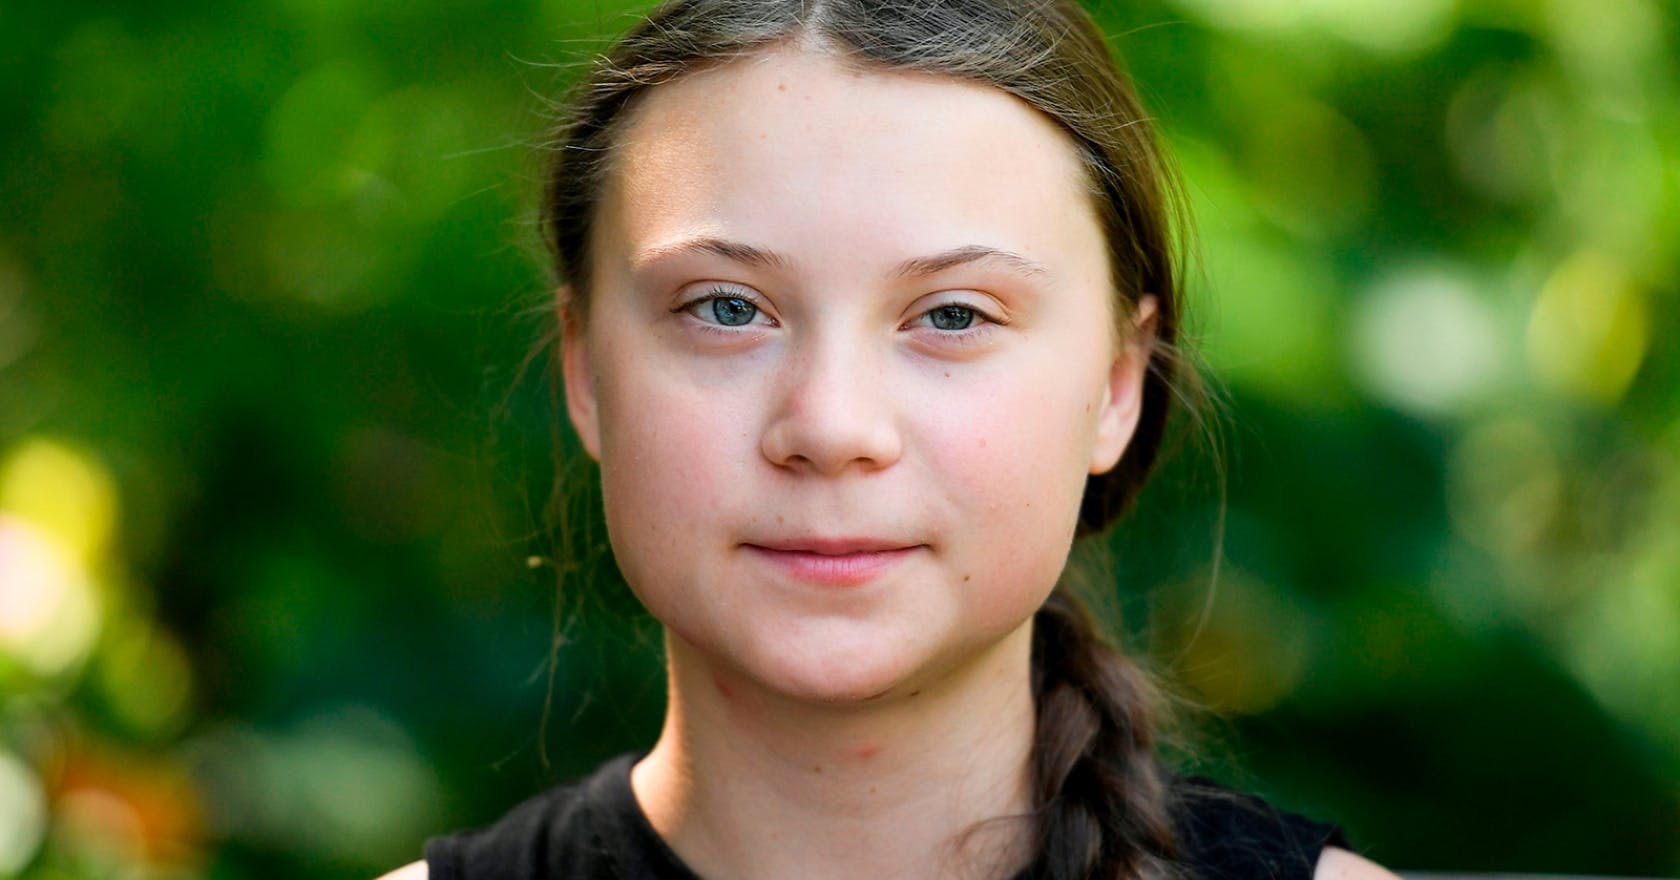 Exclusive: inside the media conspiracy to hype Greta Thunberg